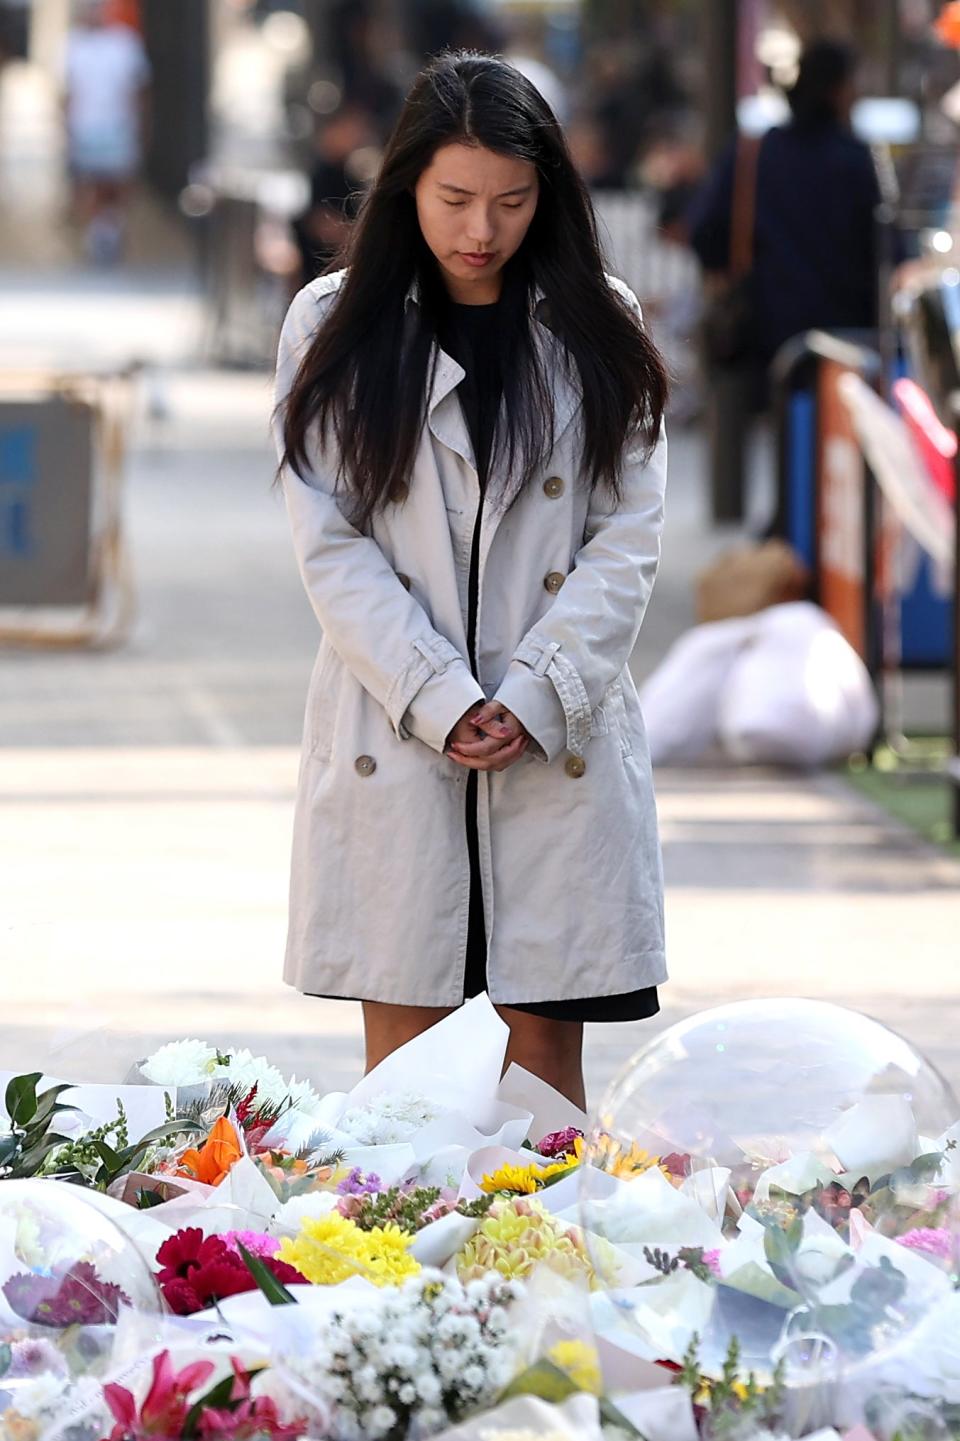 A woman takes a moment to remember those who died in the shopping centre attack (Getty Images)